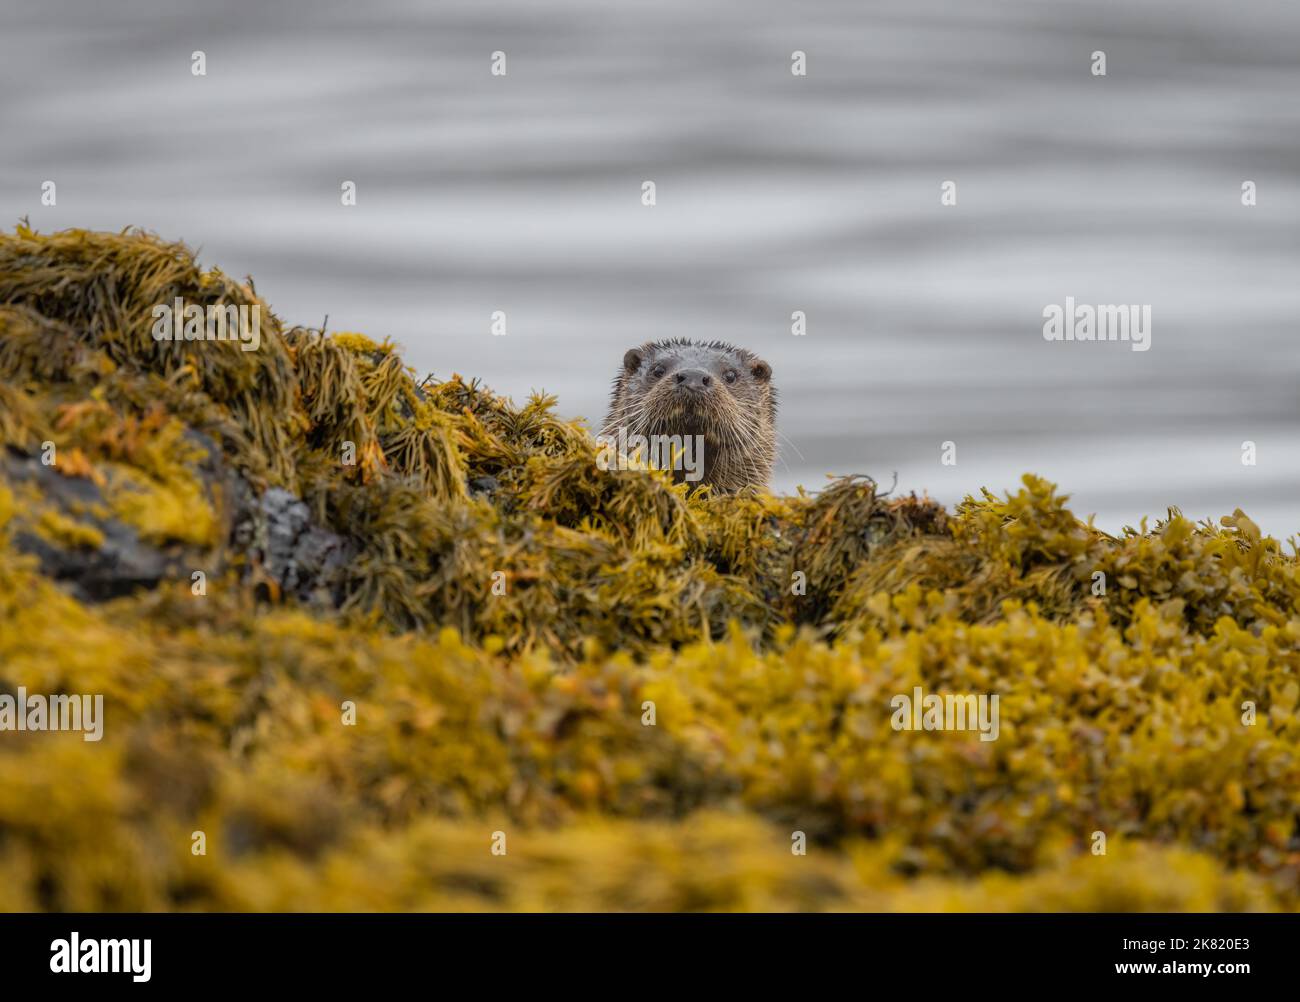 A male otter comes to investigate the photographer on the shore of a scottish loch on the Isle of Mull Stock Photo